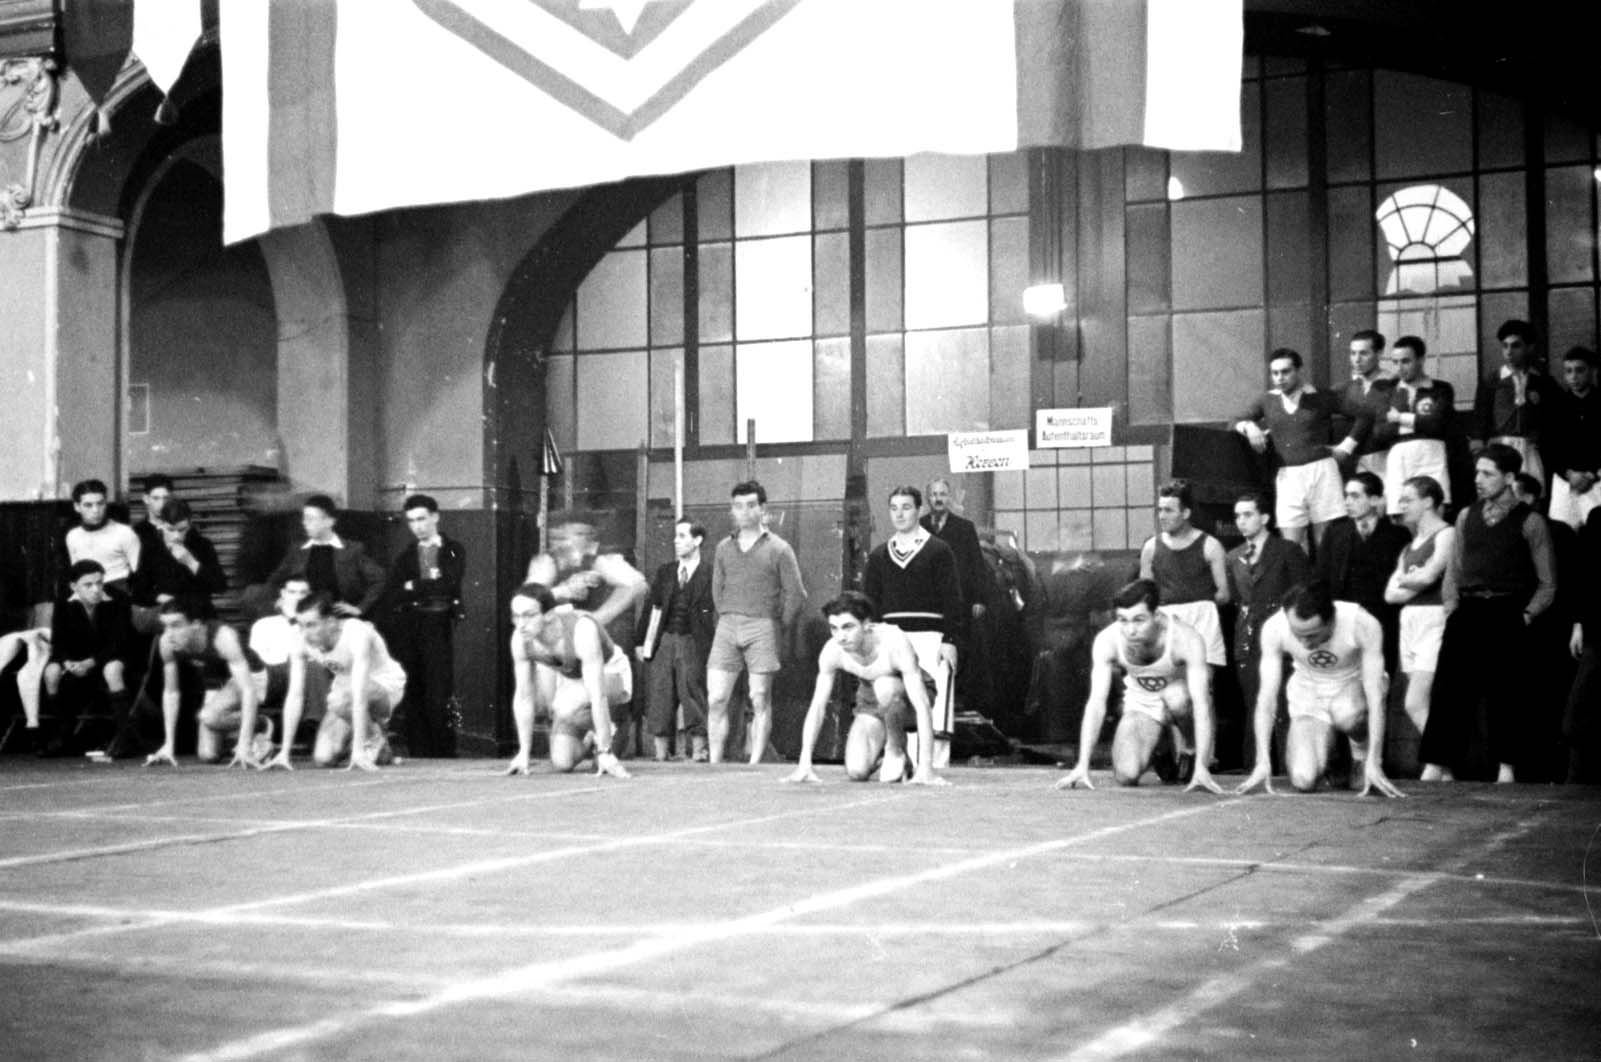 Berlin, Germany. Race that took place as part of the Maccabi sport association events in Germany, November-December 1936